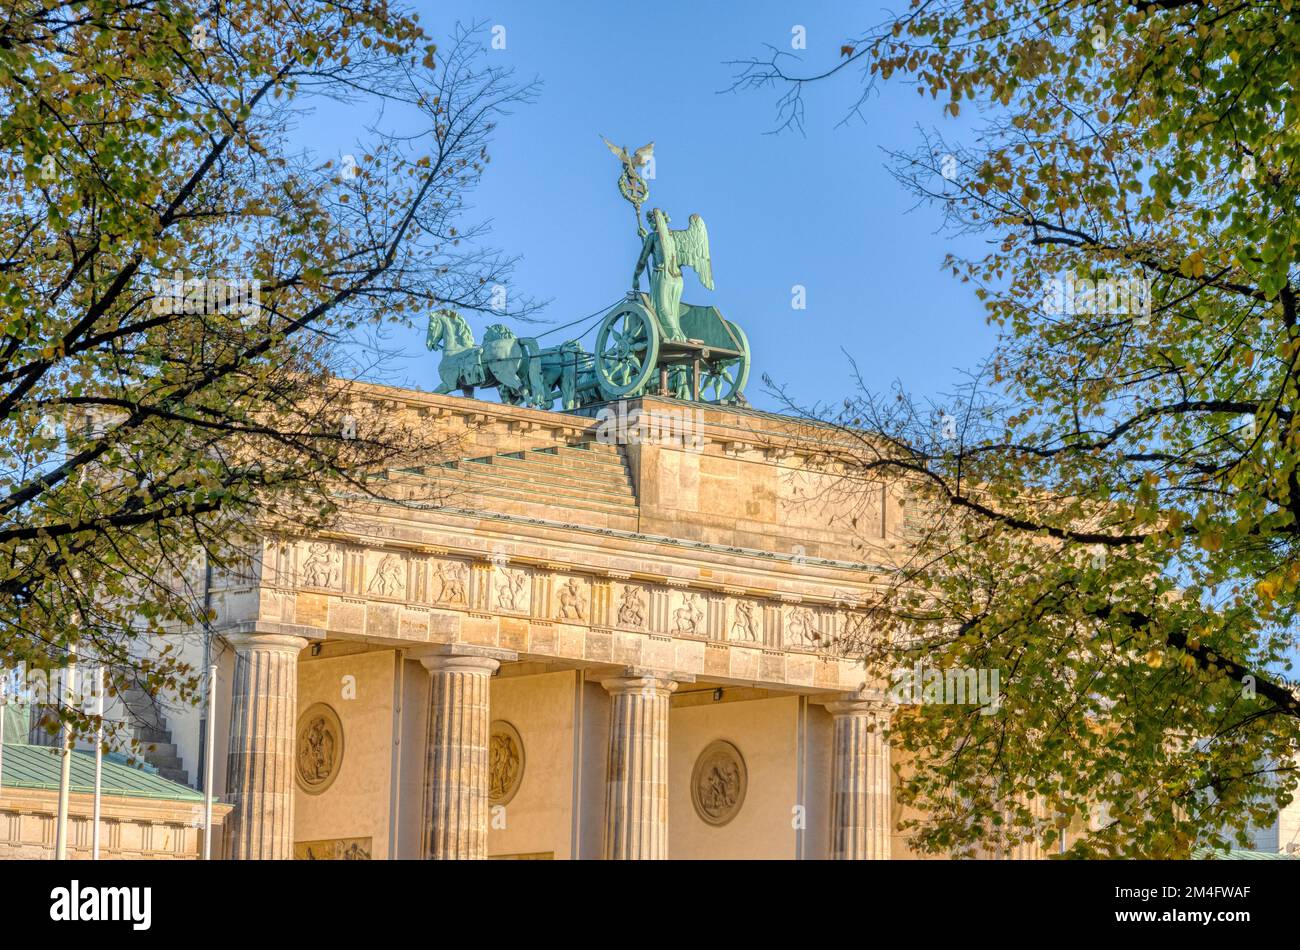 The backside of the famous Brandenburg Gate in Berlin seen through some trees Stock Photo